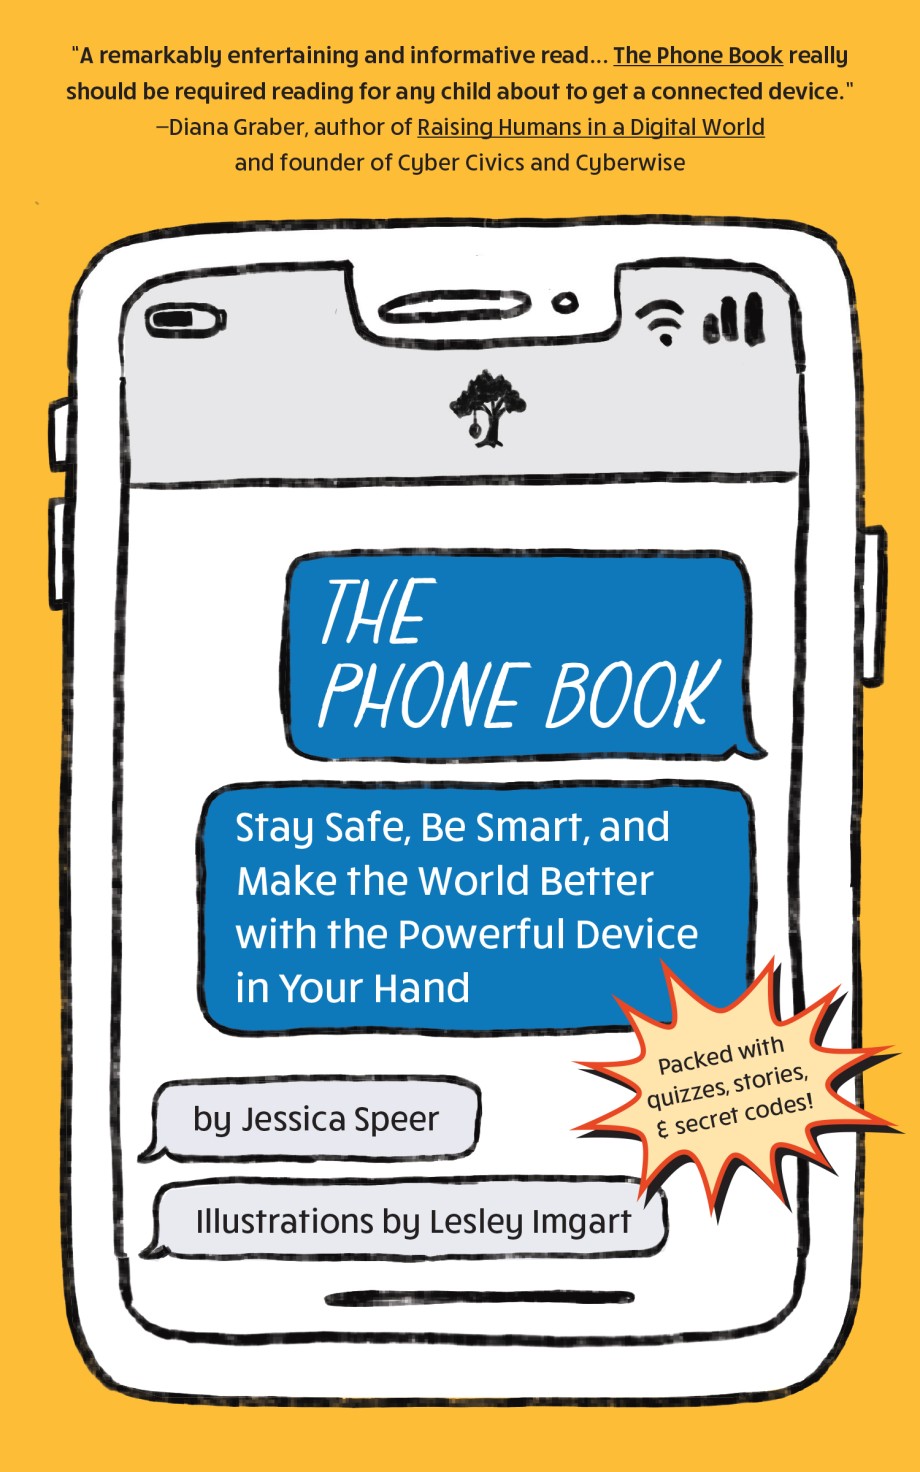 Phone Book Stay Safe, Be Smart, and Make the World Better with the Powerful Device in Your Hand